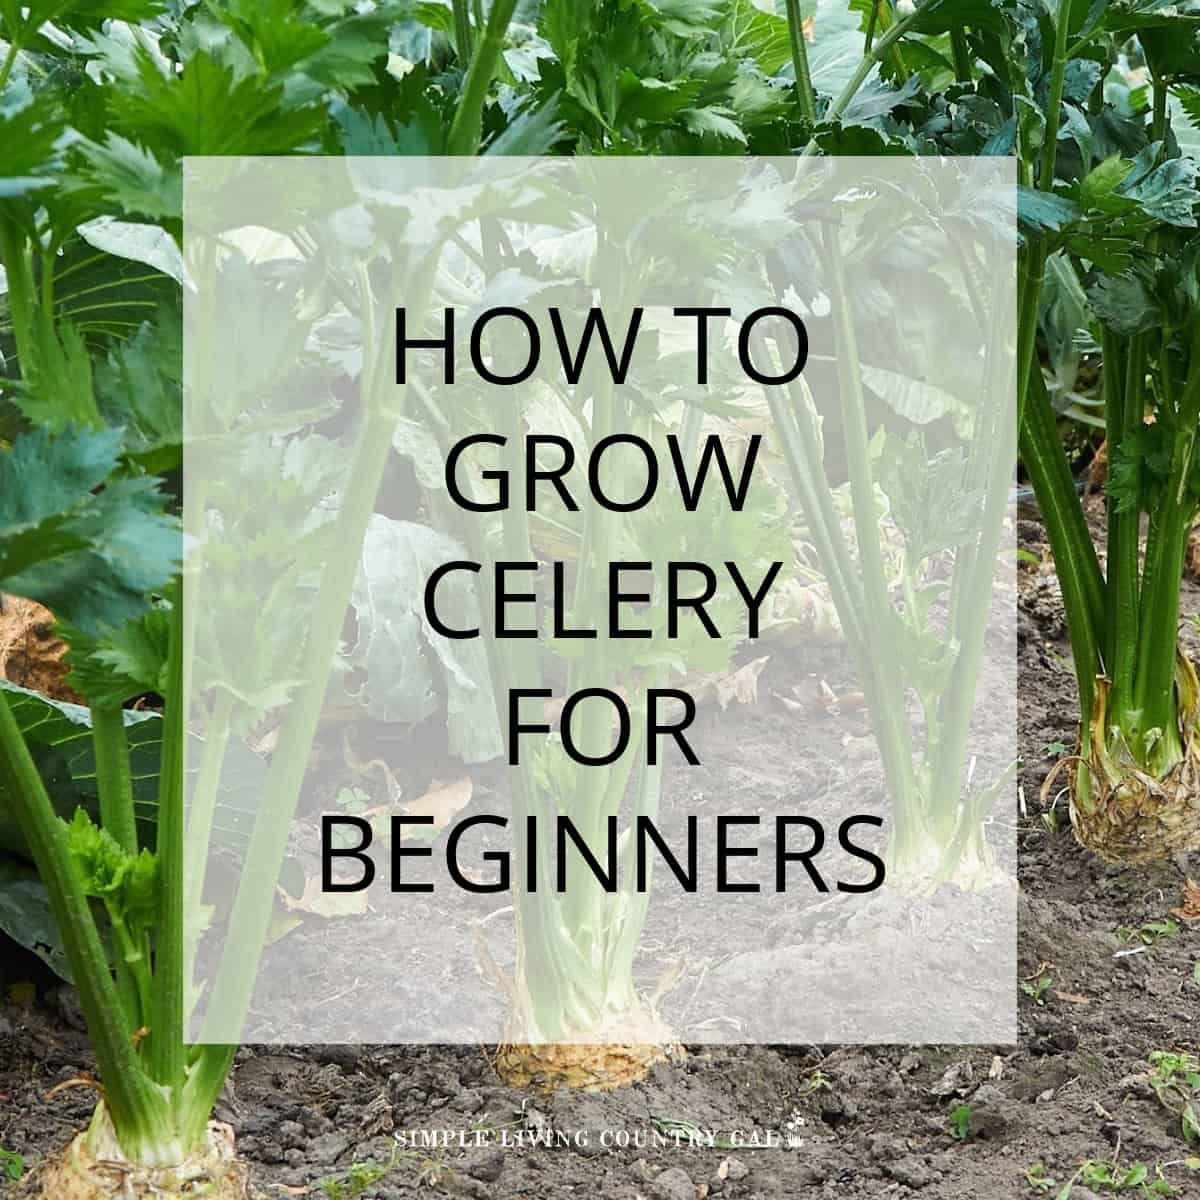 HOW TO GROW CELERY FOR BEGINNERS